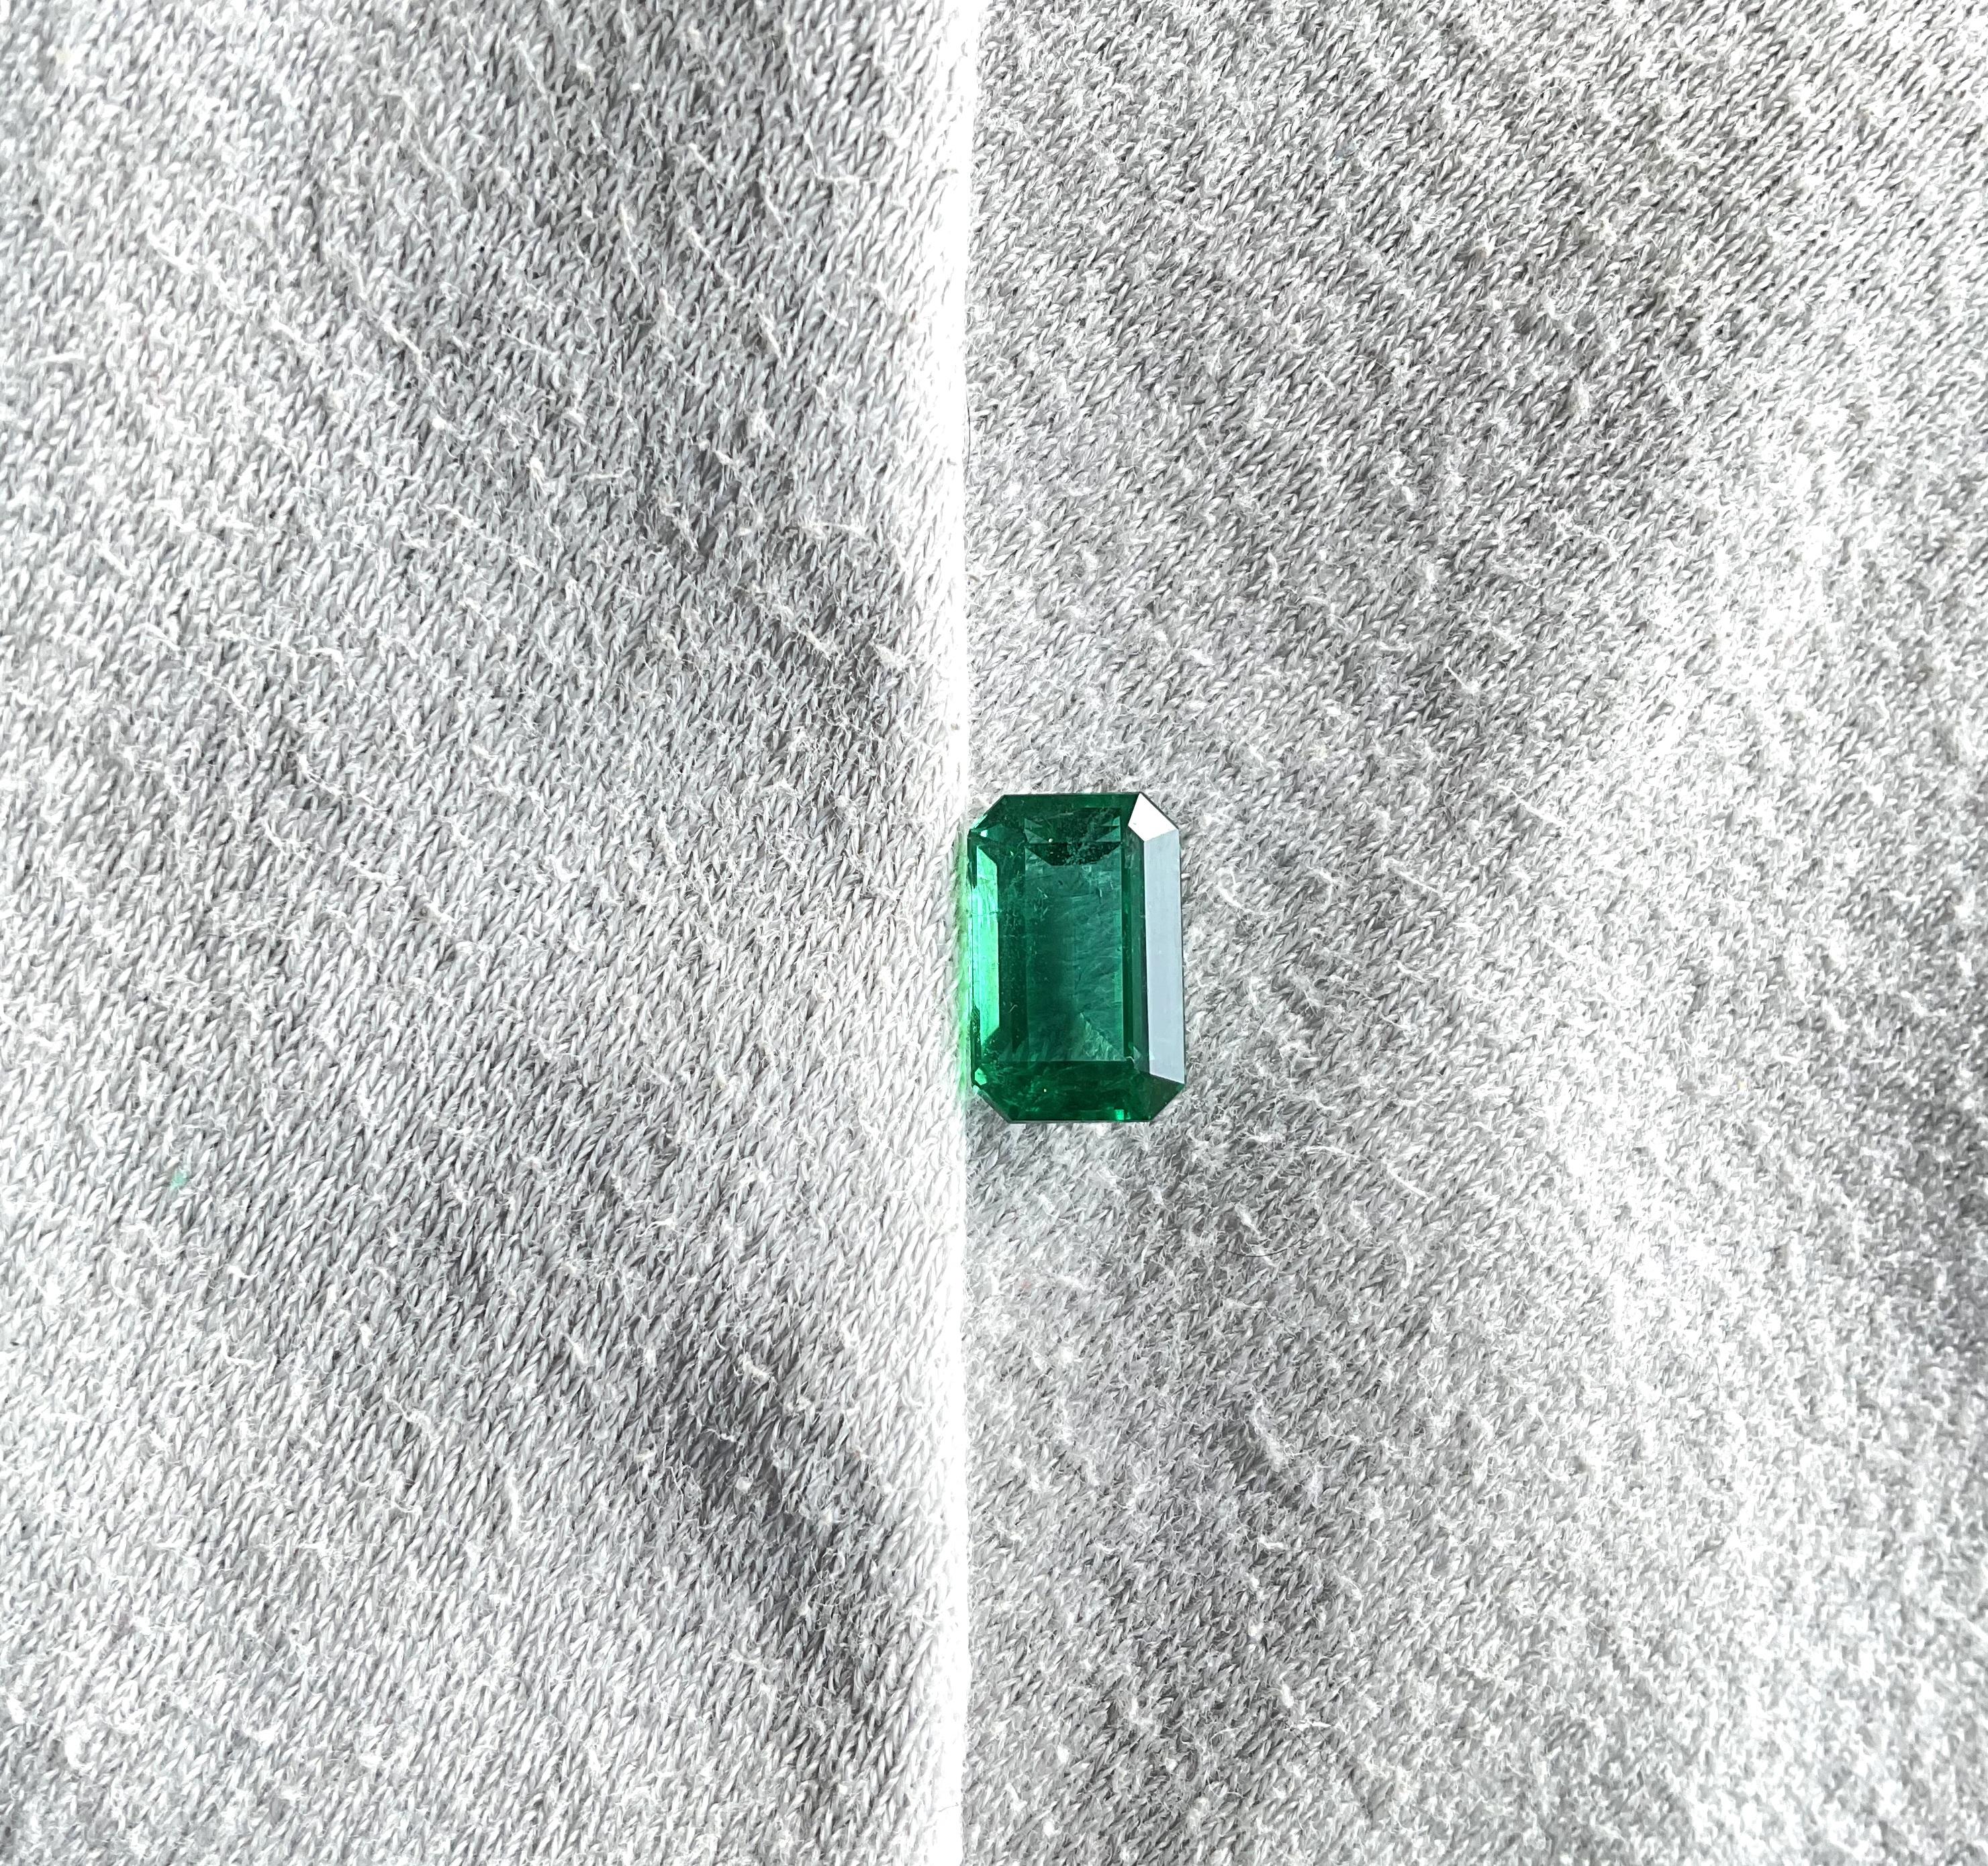 Zambian Emerald Octagon Cut stone for fine Jewelry Natural Gemstone
Weight: 3.53 Carats
Size: 11x7x5.5 MM
Pieces: 1
Shape: Octagon